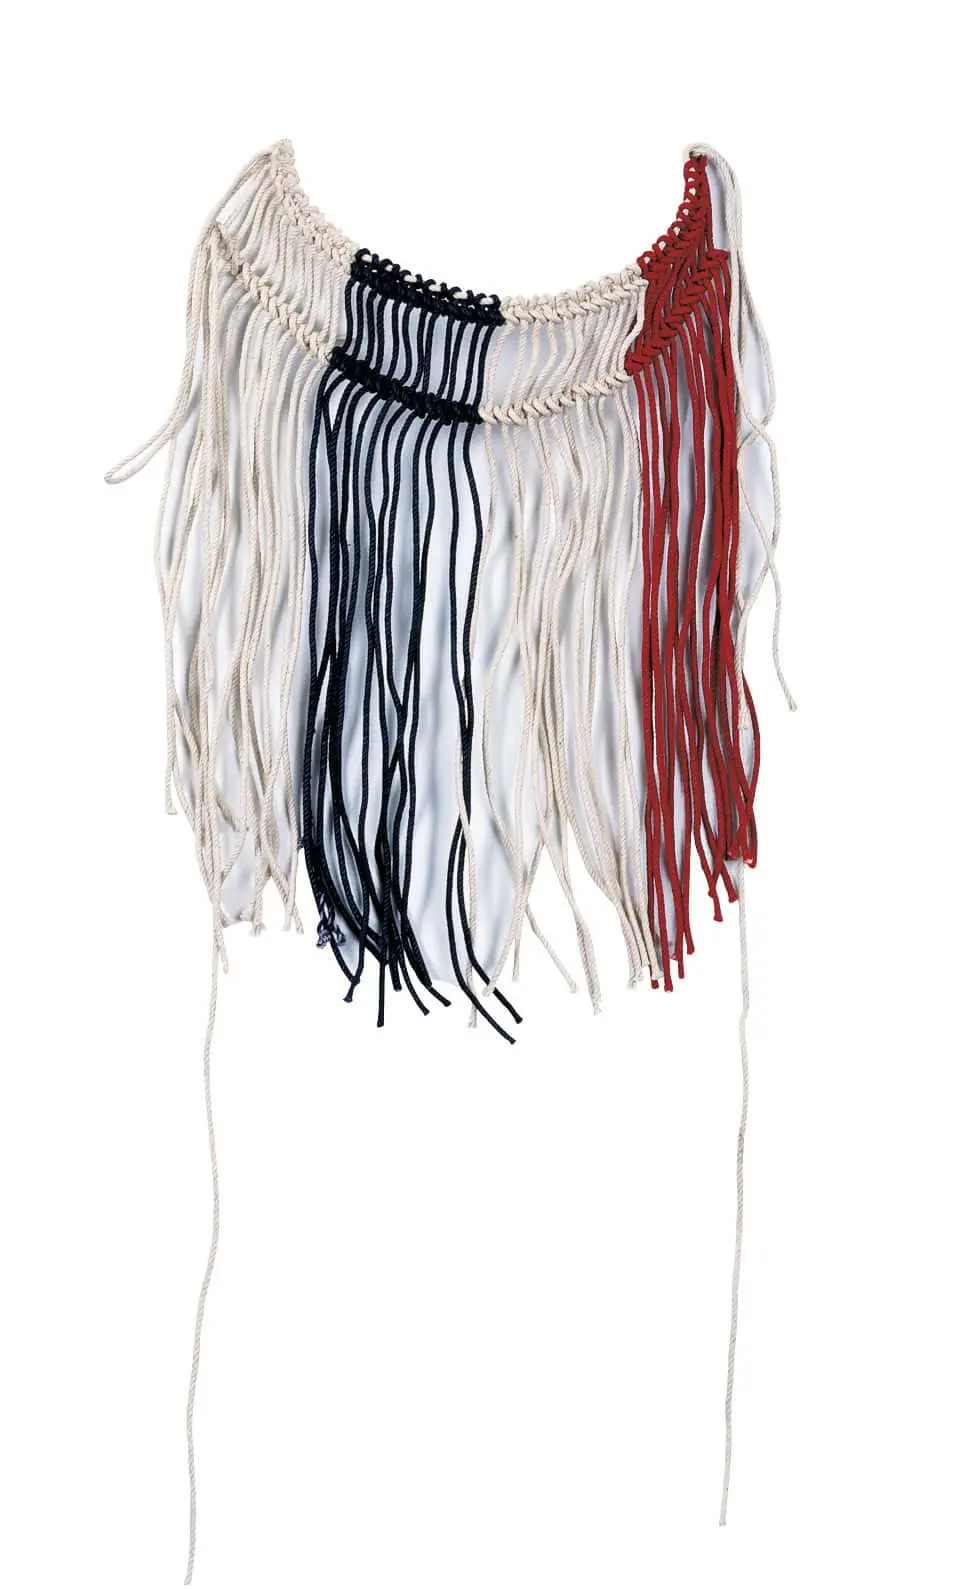 Fly fringe strap made of cotton cords